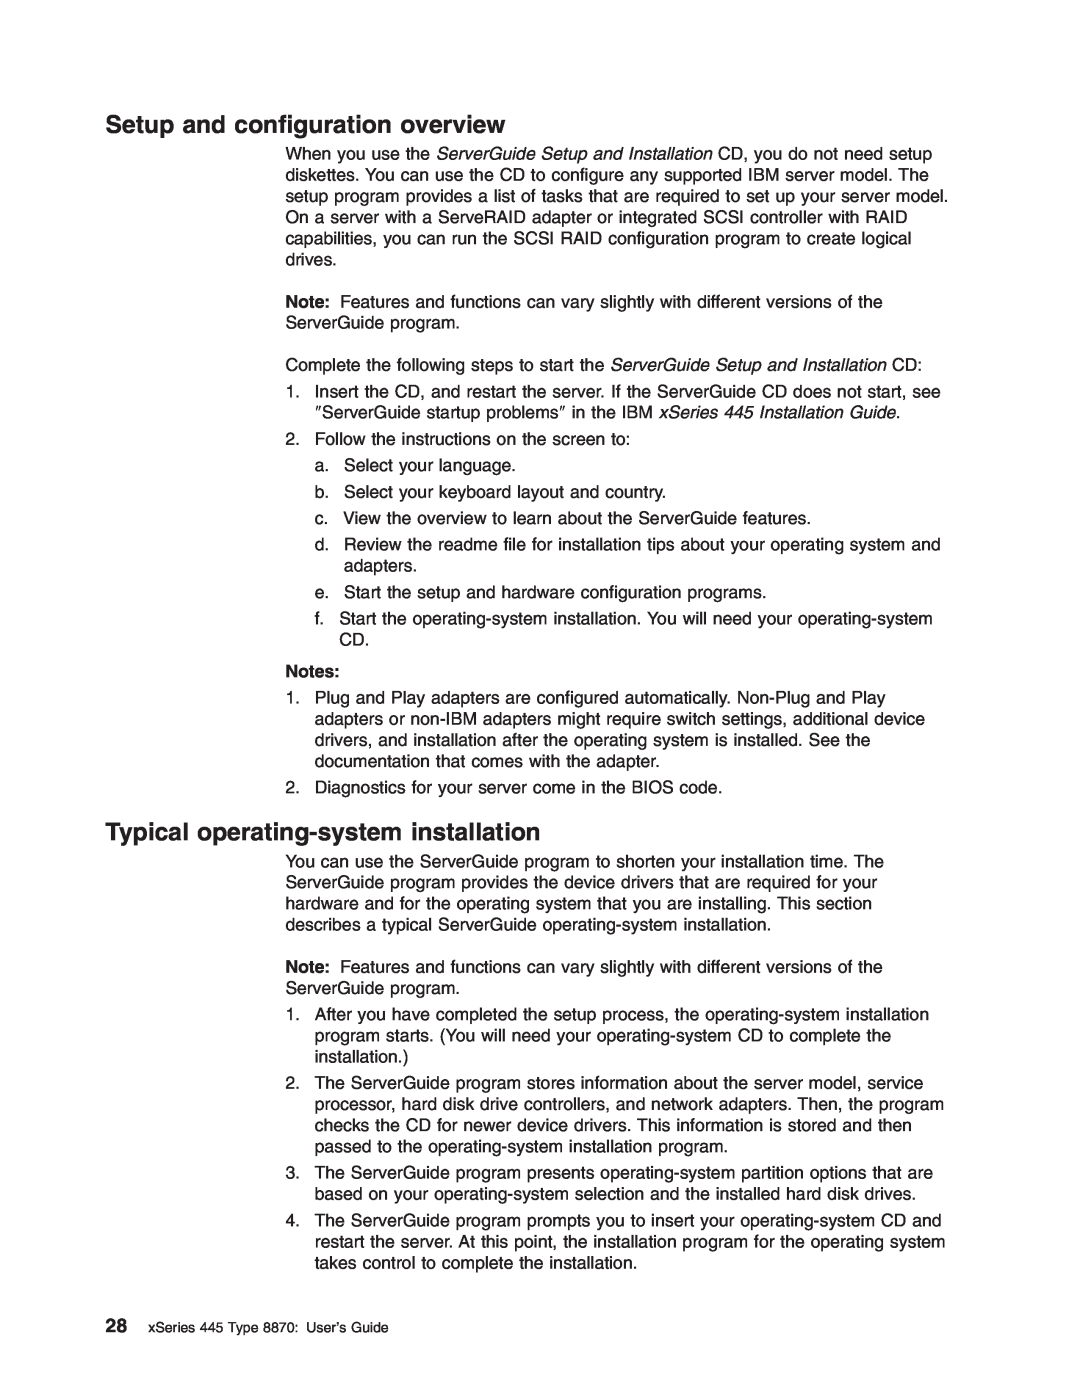 IBM manual Setup and configuration overview, Typical operating-system installation, xSeries 445 Type 8870 User’s Guide 